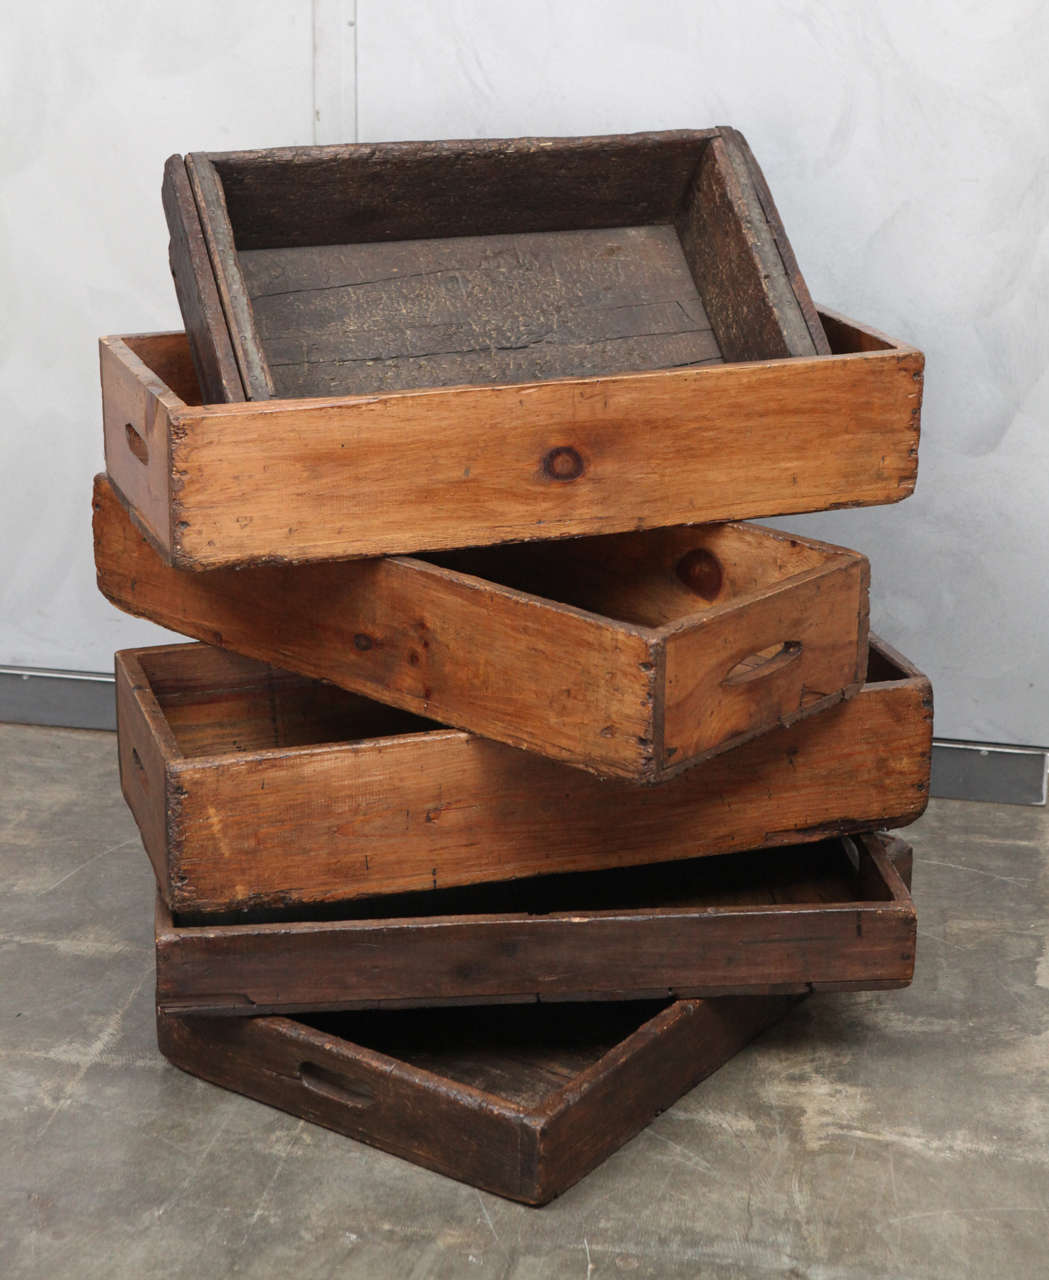 These wonderful rustic American Industrial Factory Trays are in a few different sizes and can be sold singly or in groups. Besides the smallest tray, these trays have nice cutout handles that make them utilitarian as trays and can be used as great